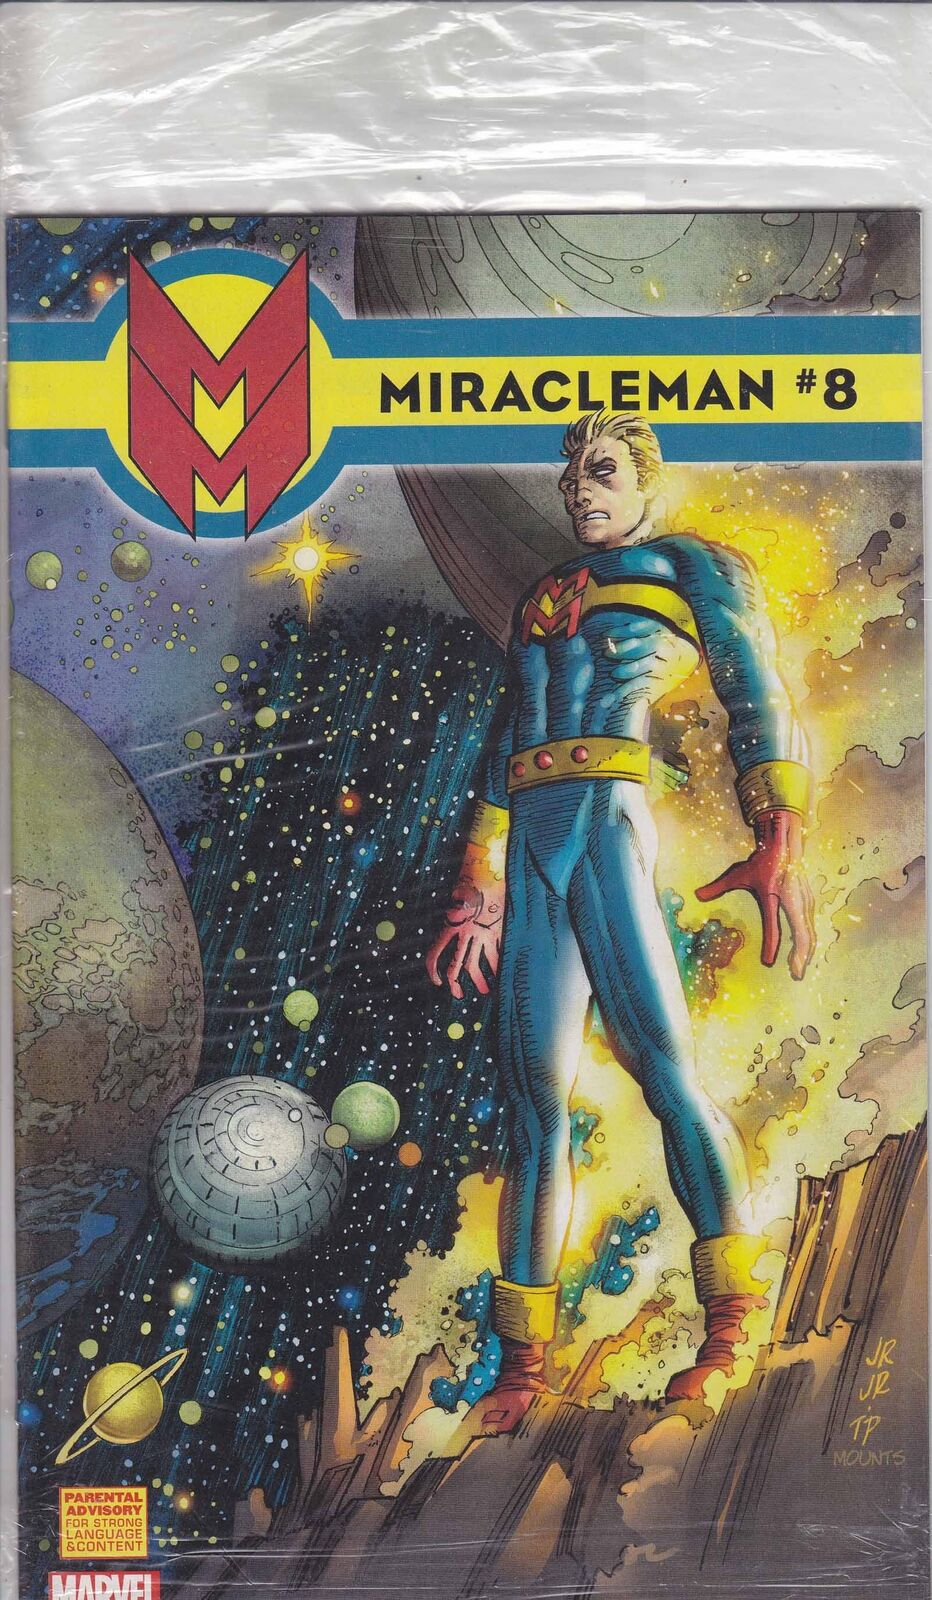 Miracleman (2nd Series) #8 (in bag) VF/NM; Marvel | Alan Moore - we combine ship